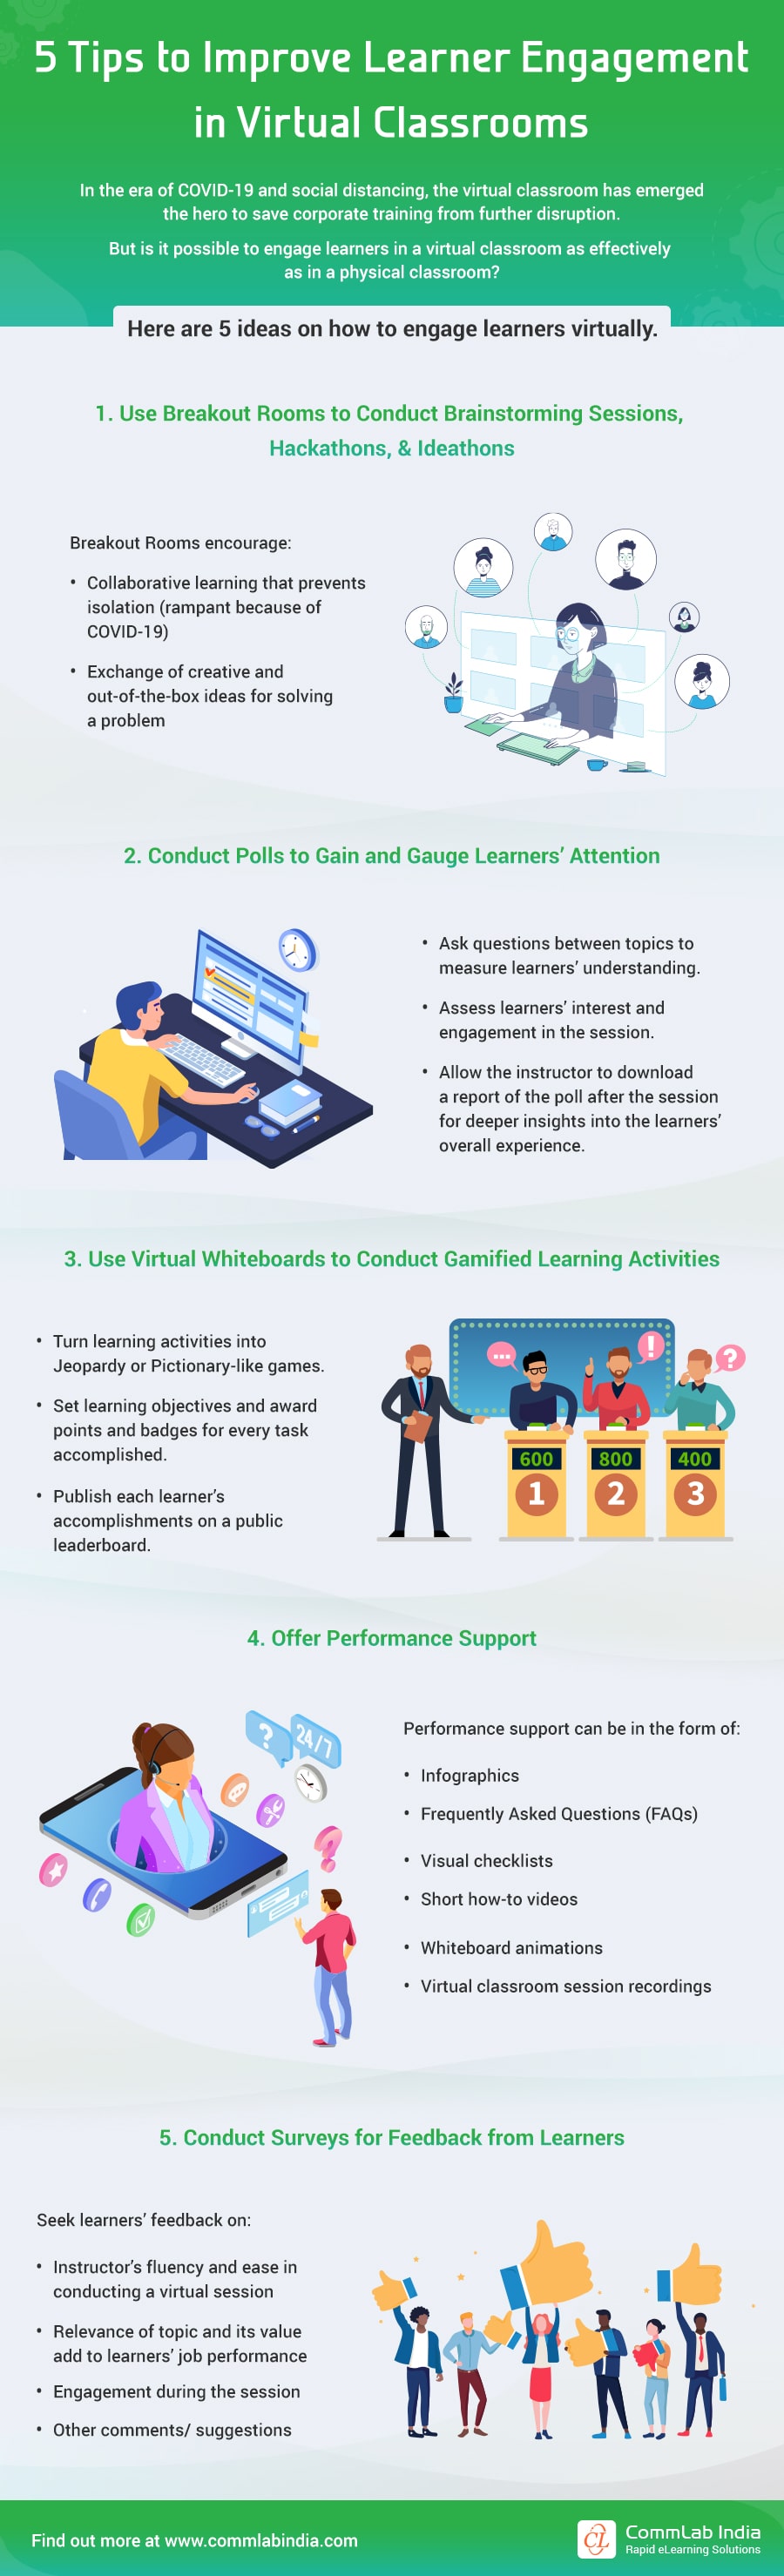 Virtual Classroom: 5 Ways to Improve Learner Engagement